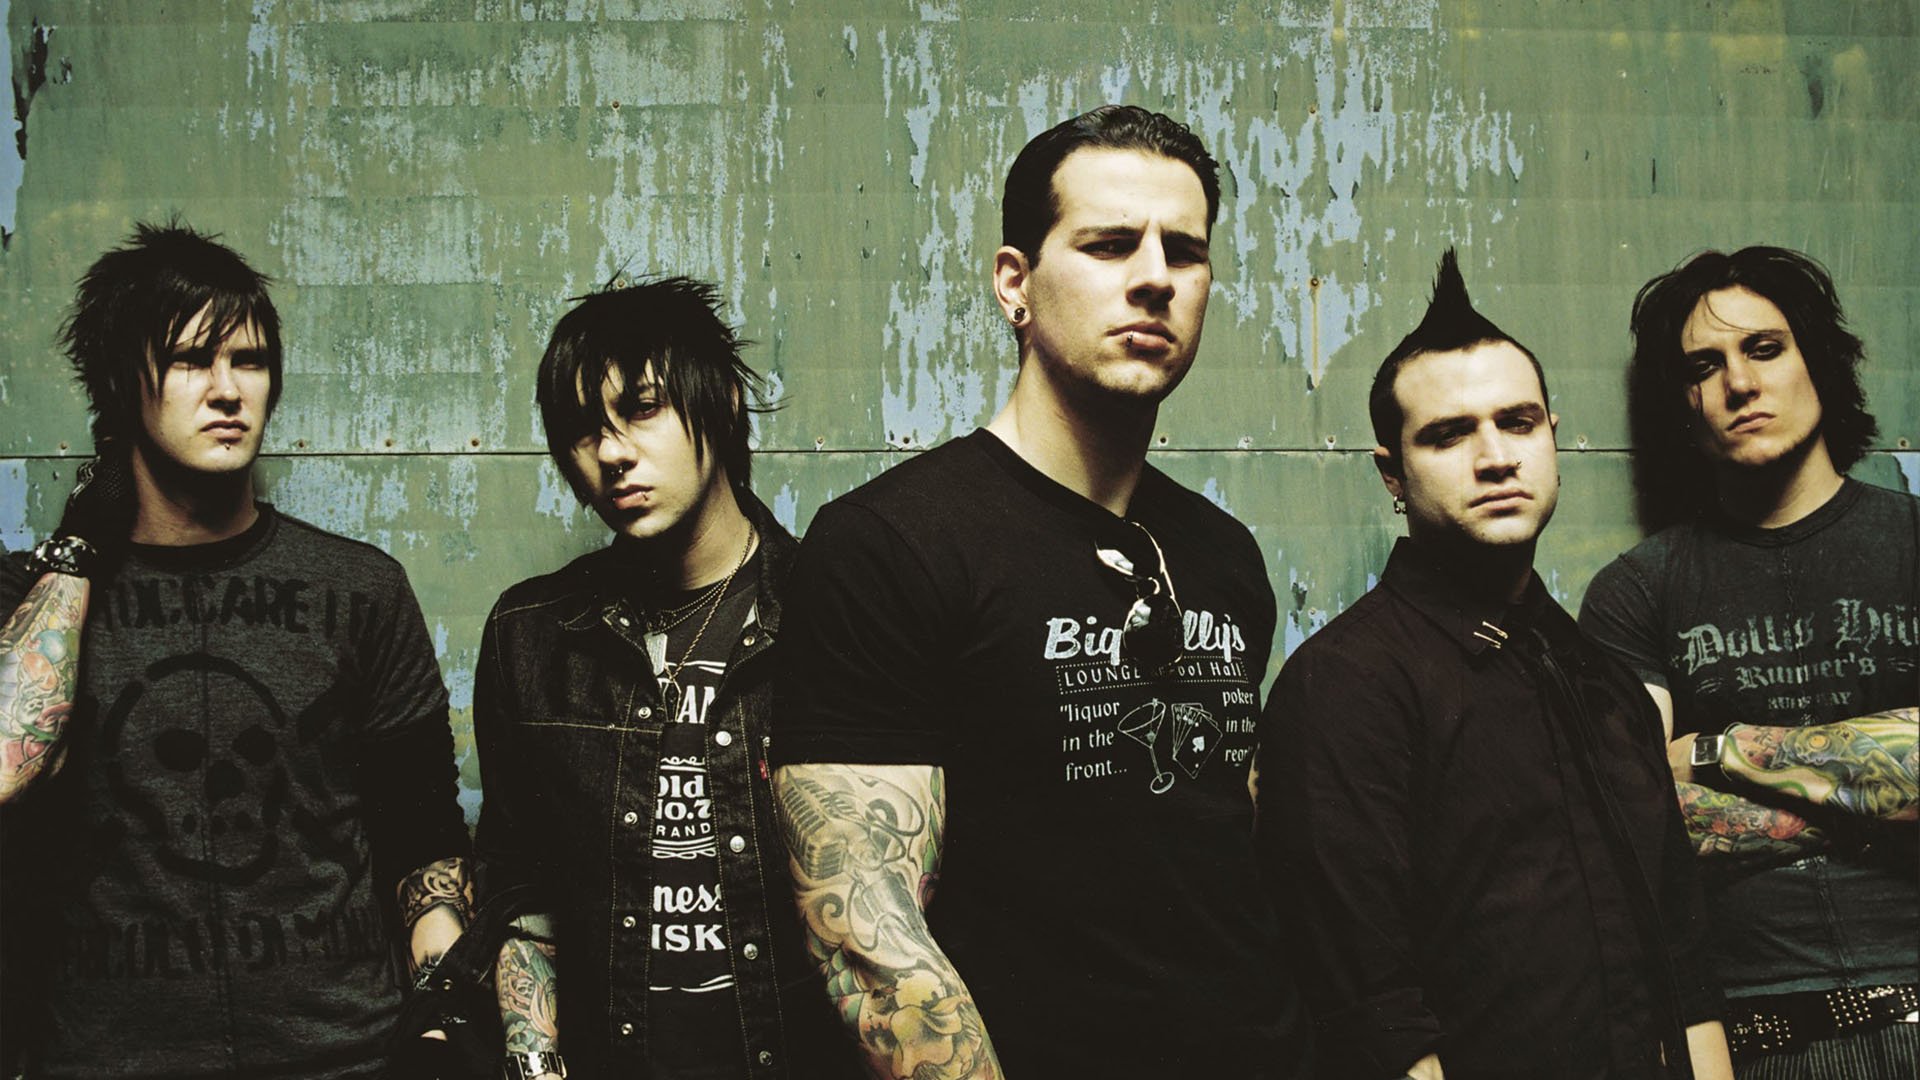 free download video avenged sevenfold mia gh3